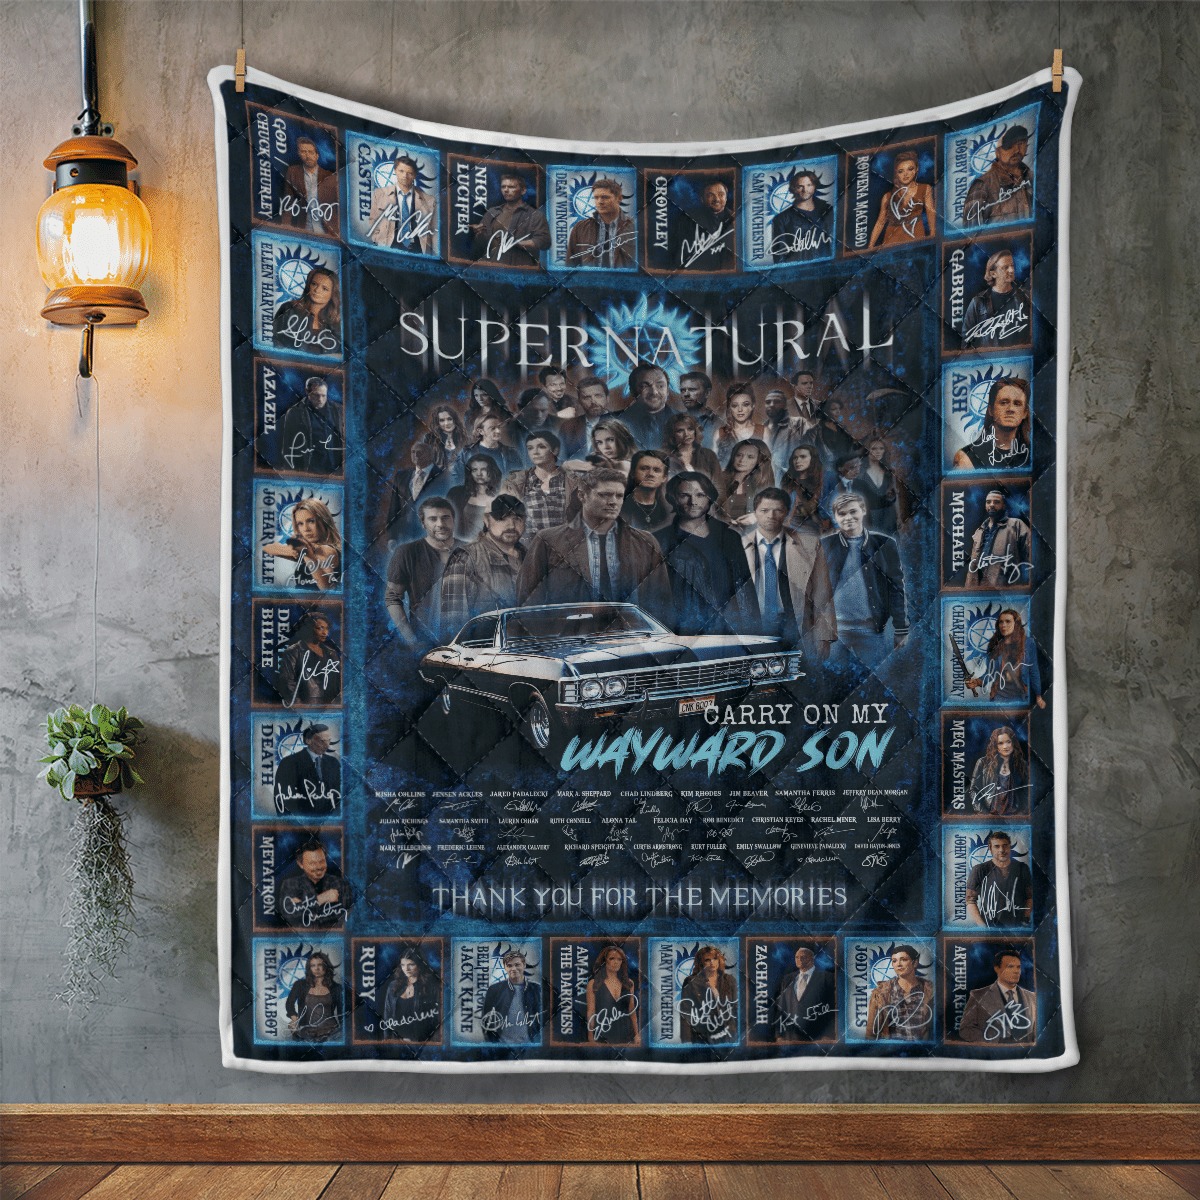 NEW Thank you for the memories Supernatural quilt 11